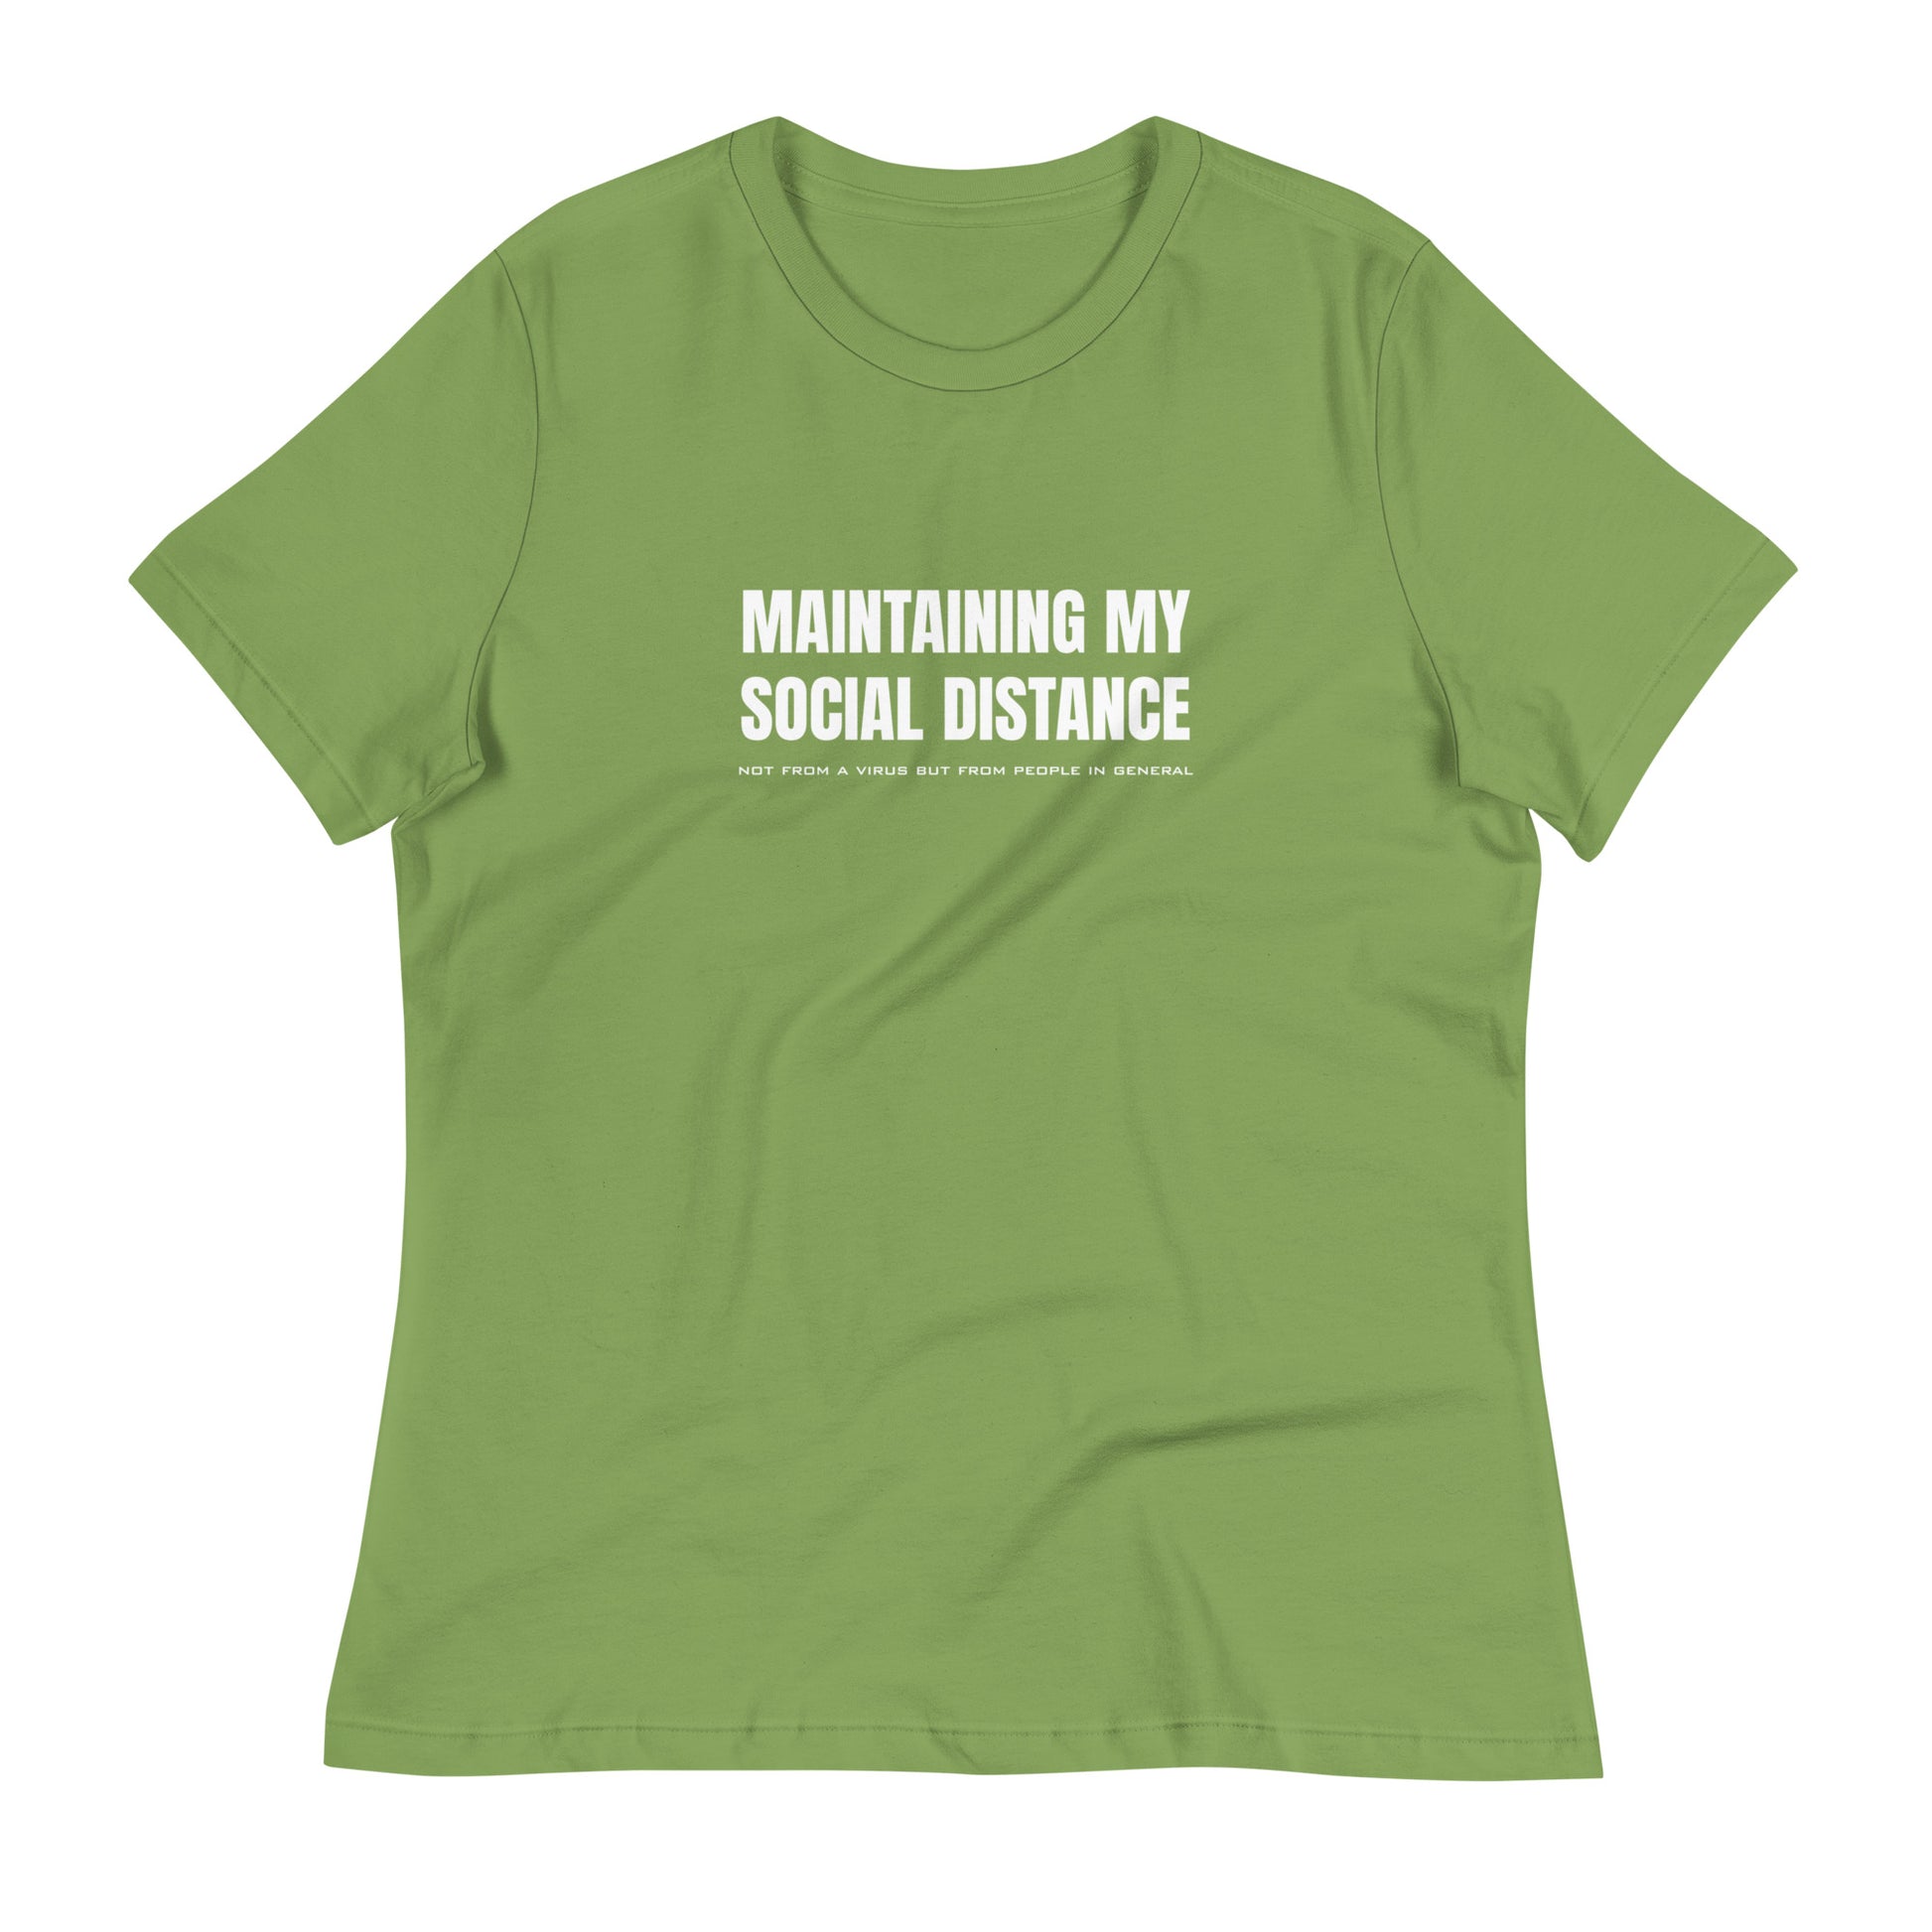 Leaf green women's relaxed fit t-shirt with white graphic: "MAINTAINING MY SOCIAL DISTANCE not from a virus but from people in general"